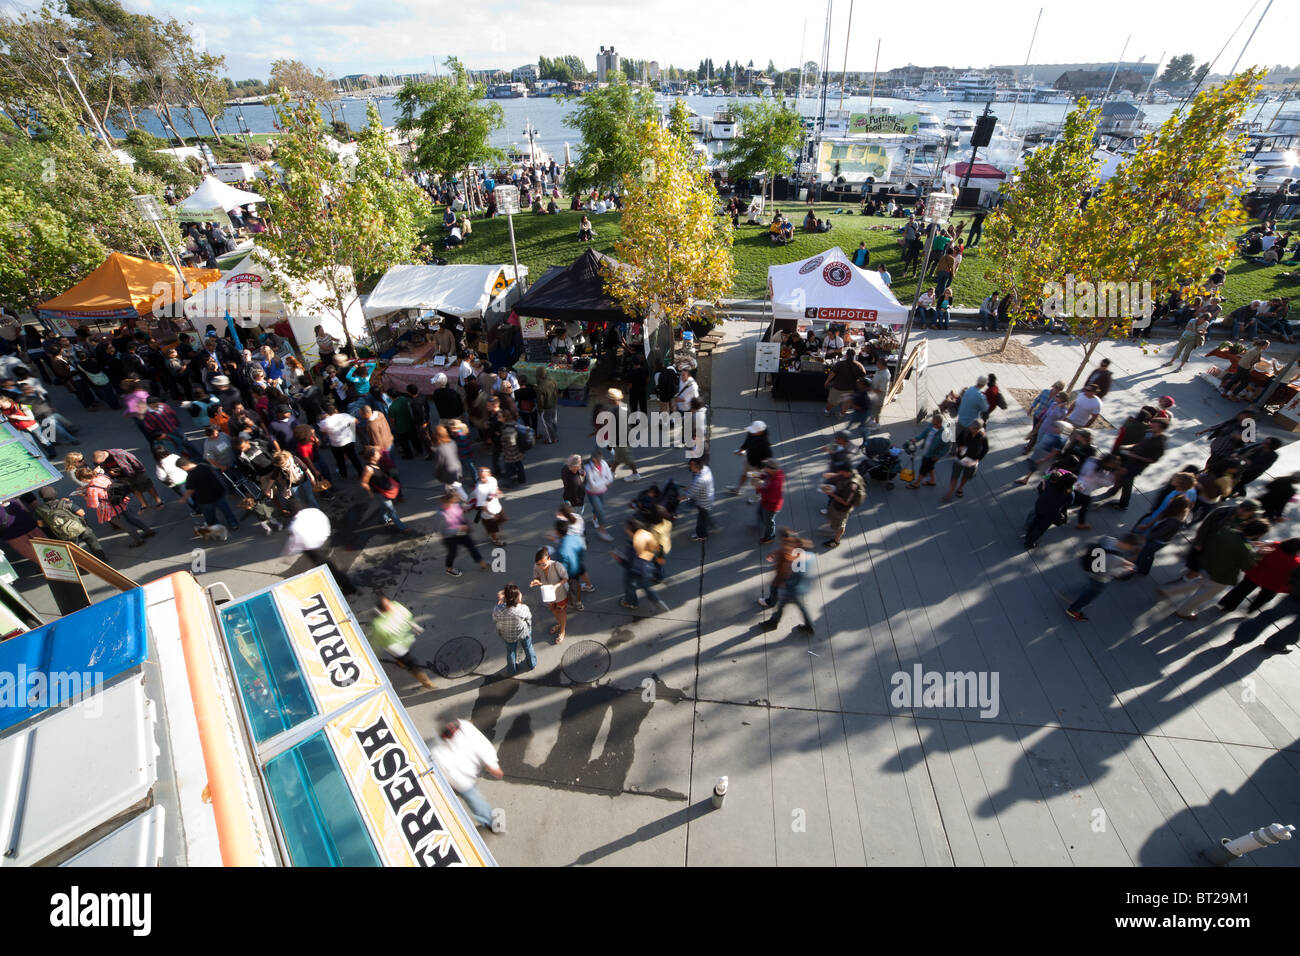 Overhead view of the annual Eat Real Food Festival in Oakland's Jack London Square. Stock Photo